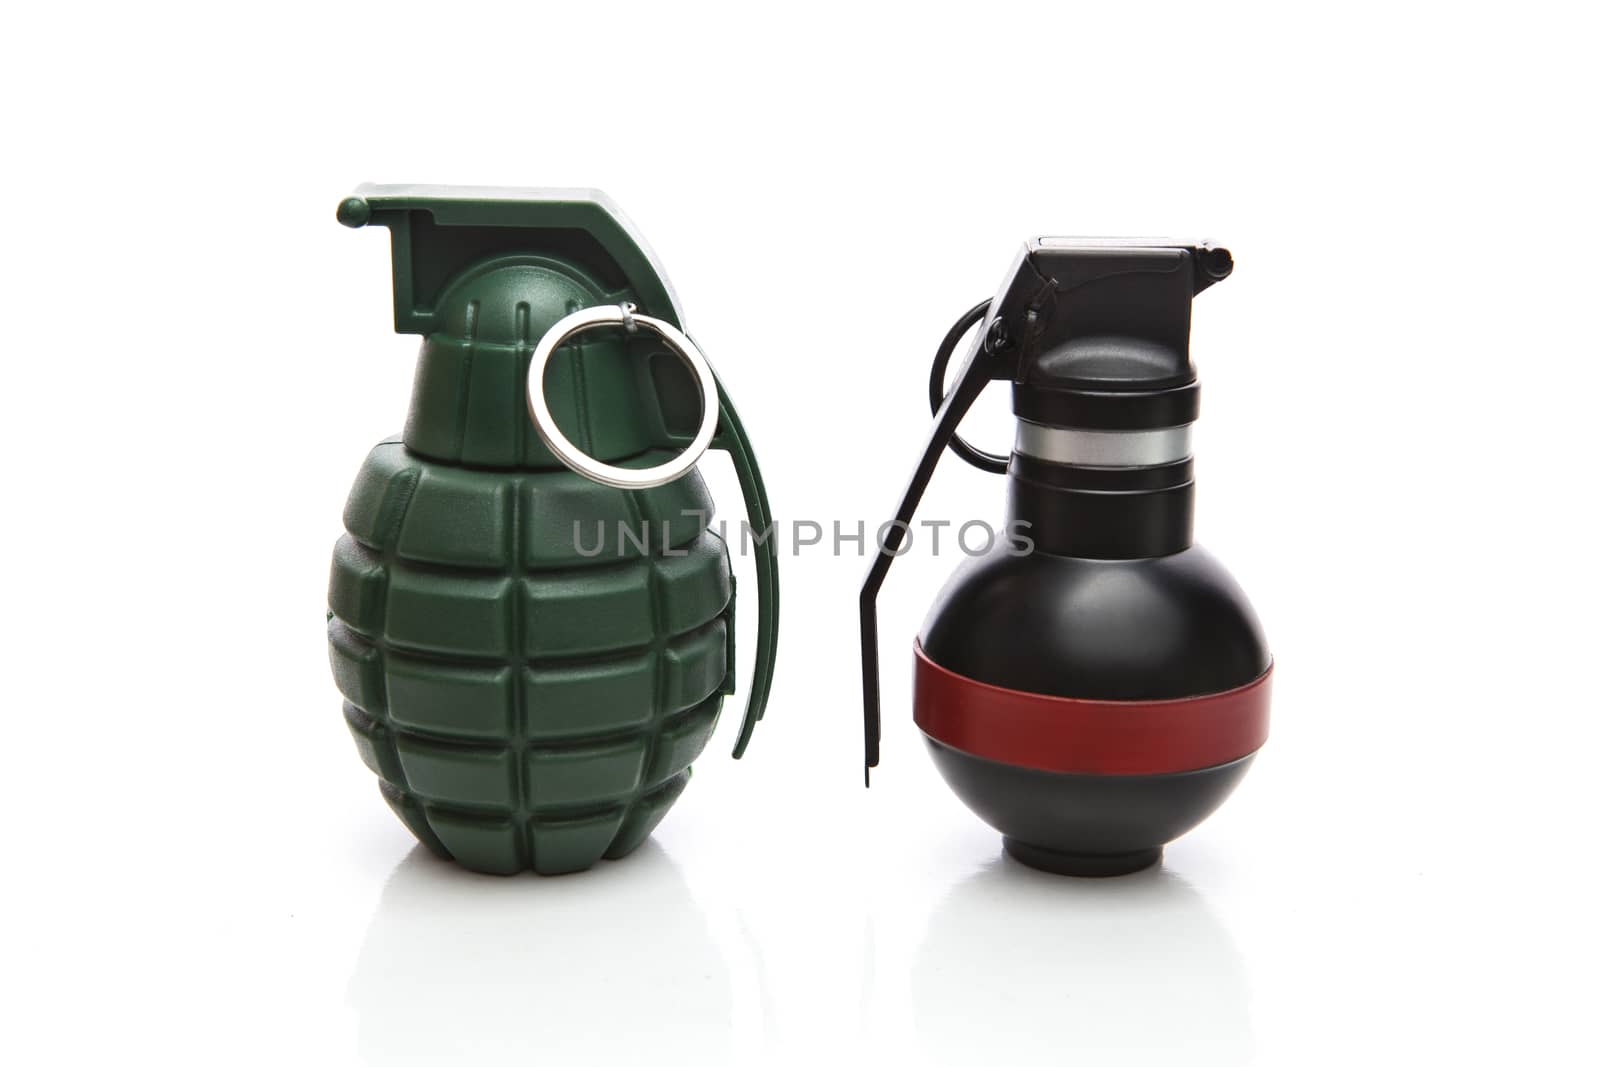 kind of hand grenade bomber isolated on white background